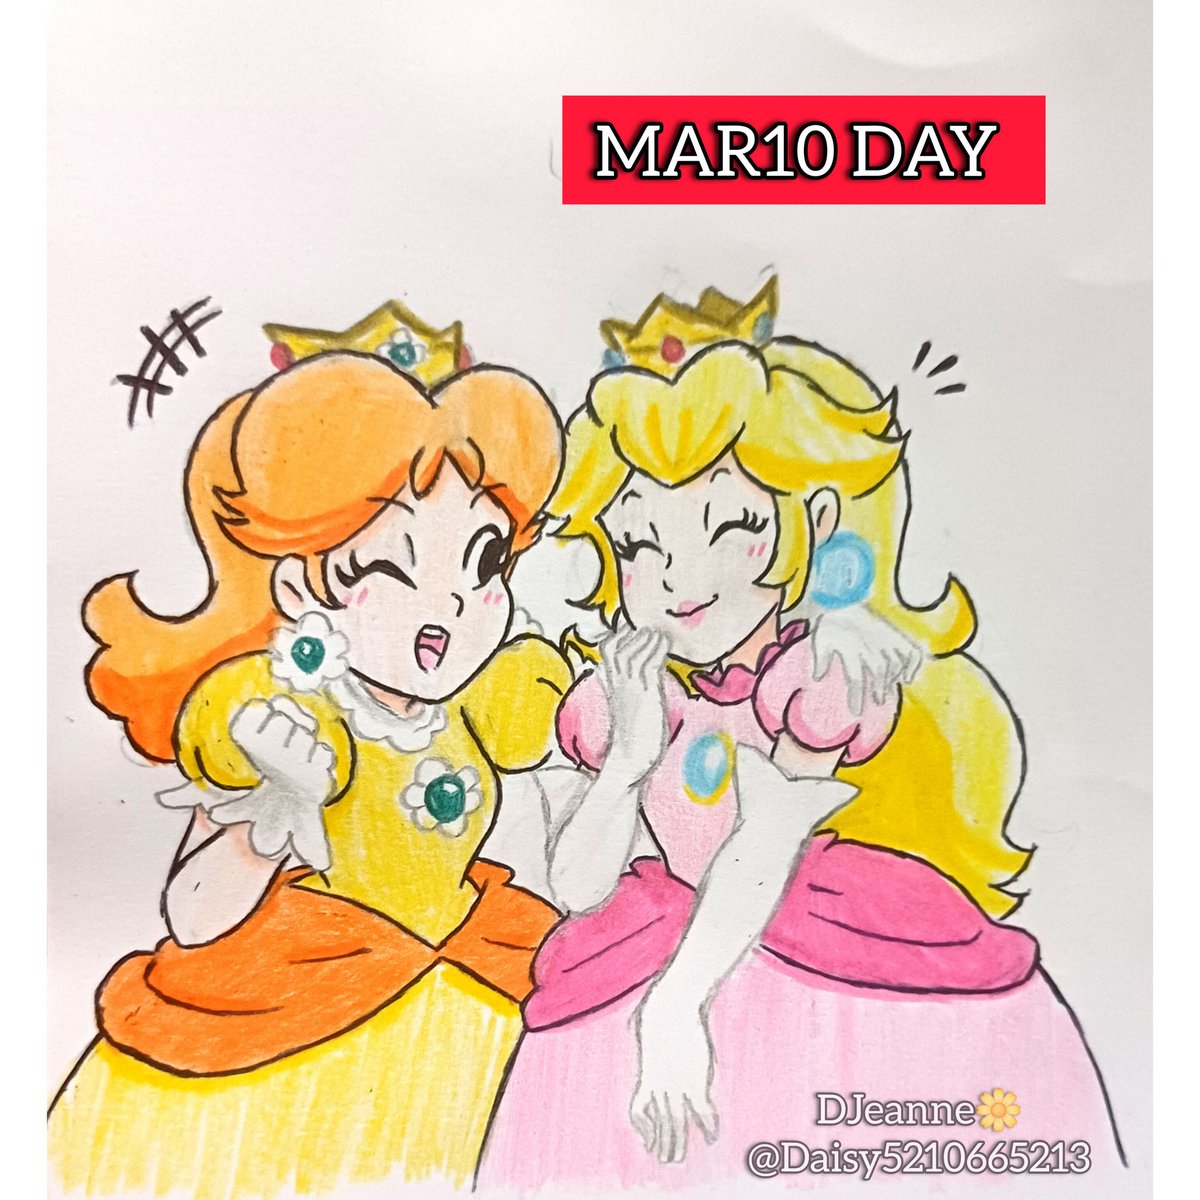 Hi!! this is my drawing for #MAR10Day
Yes, I know it should be a drawing of Mario, I wanted to draw it but I didn't have time   🥹